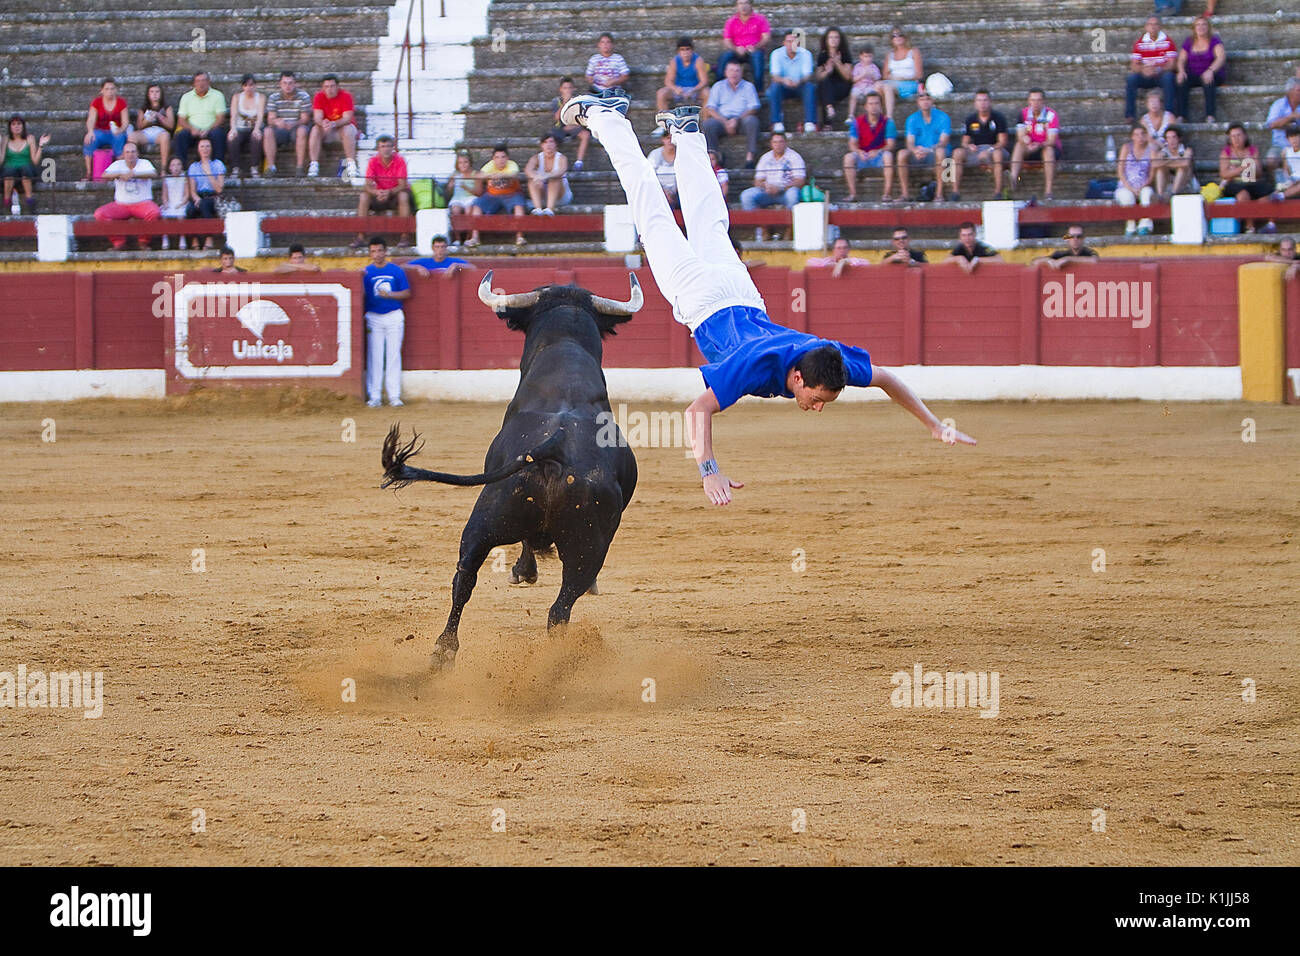 Spanish recortador performed with expertise pirouettes before the onslaught of the brave bull or heifer as are cuts, jumping over or side antitheses i Stock Photo